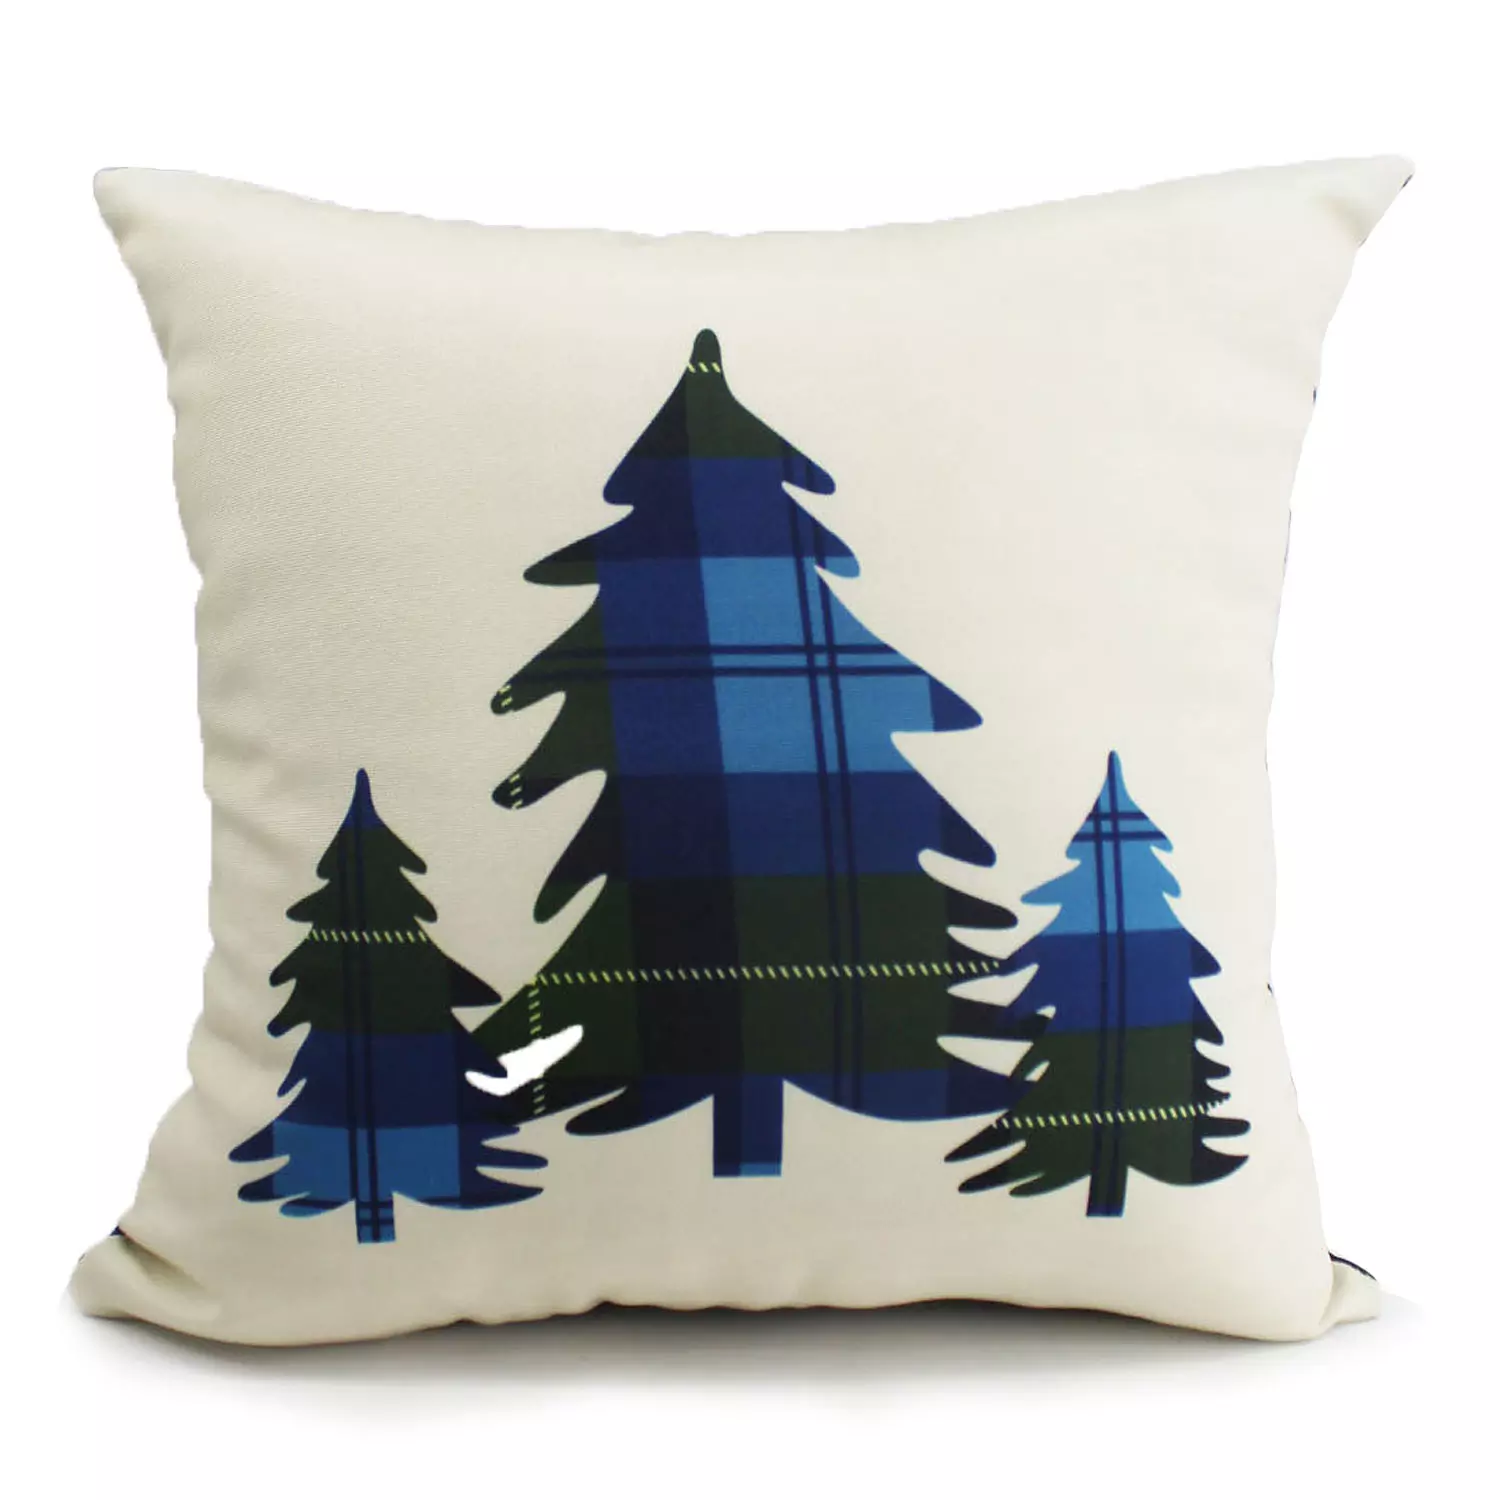 Printed decorative cushion with plaid trees front and matching plaid back, 18"x18", blue